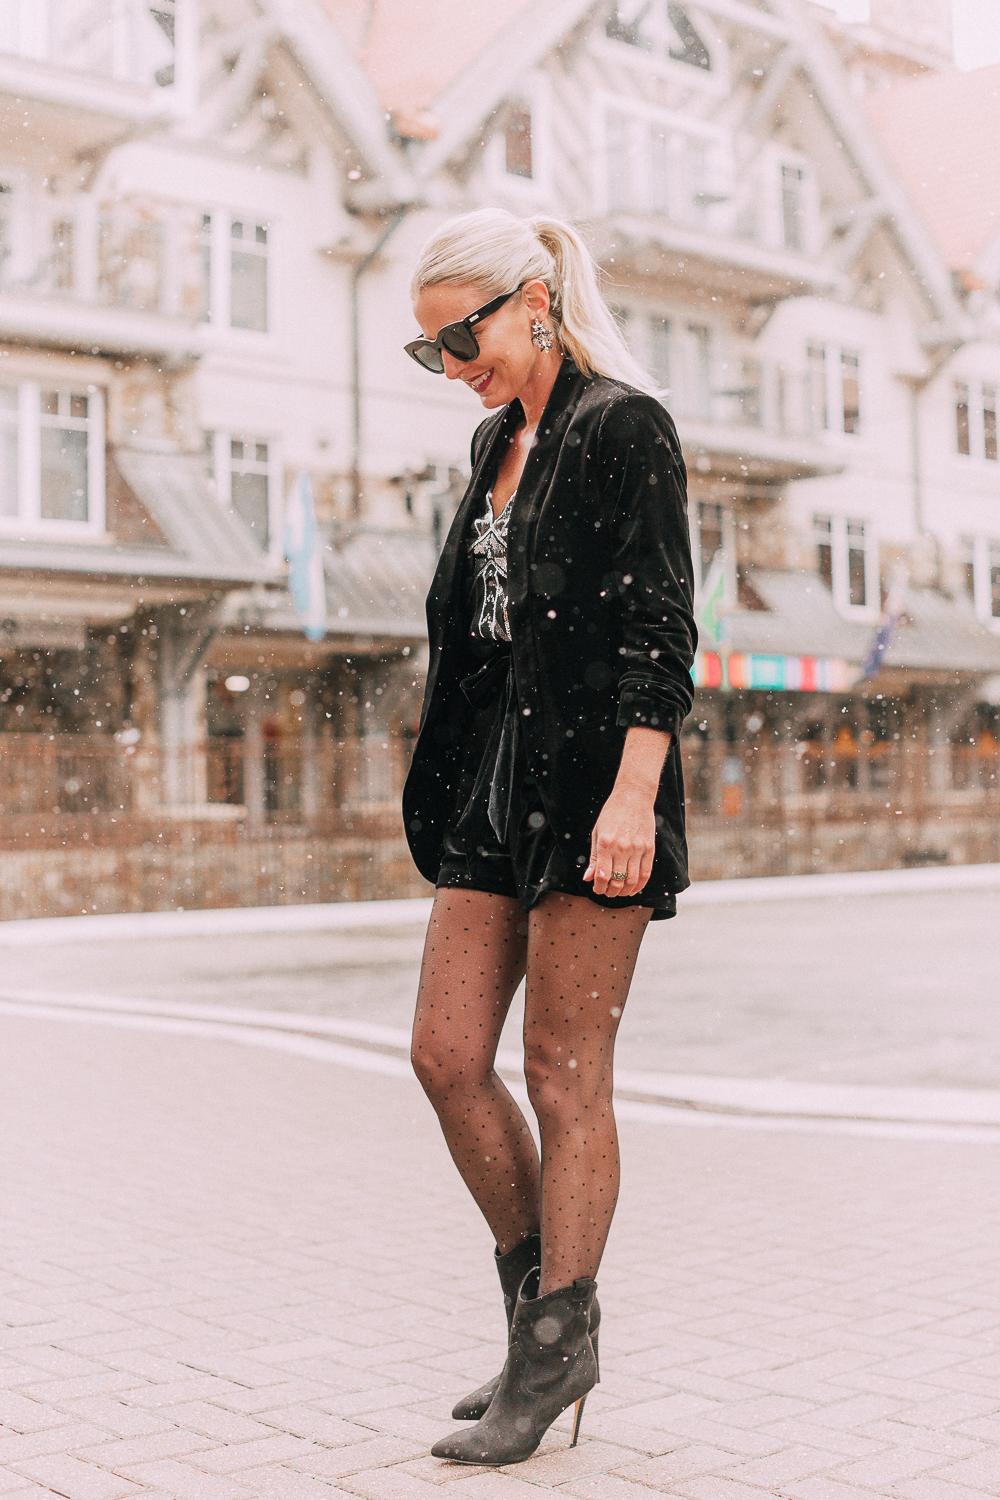 Unexpected holiday party outfits featuring a velvet Shorts suit from Express paired with Western black booties, and polka dot black tights on fashion blogger with blonde hair